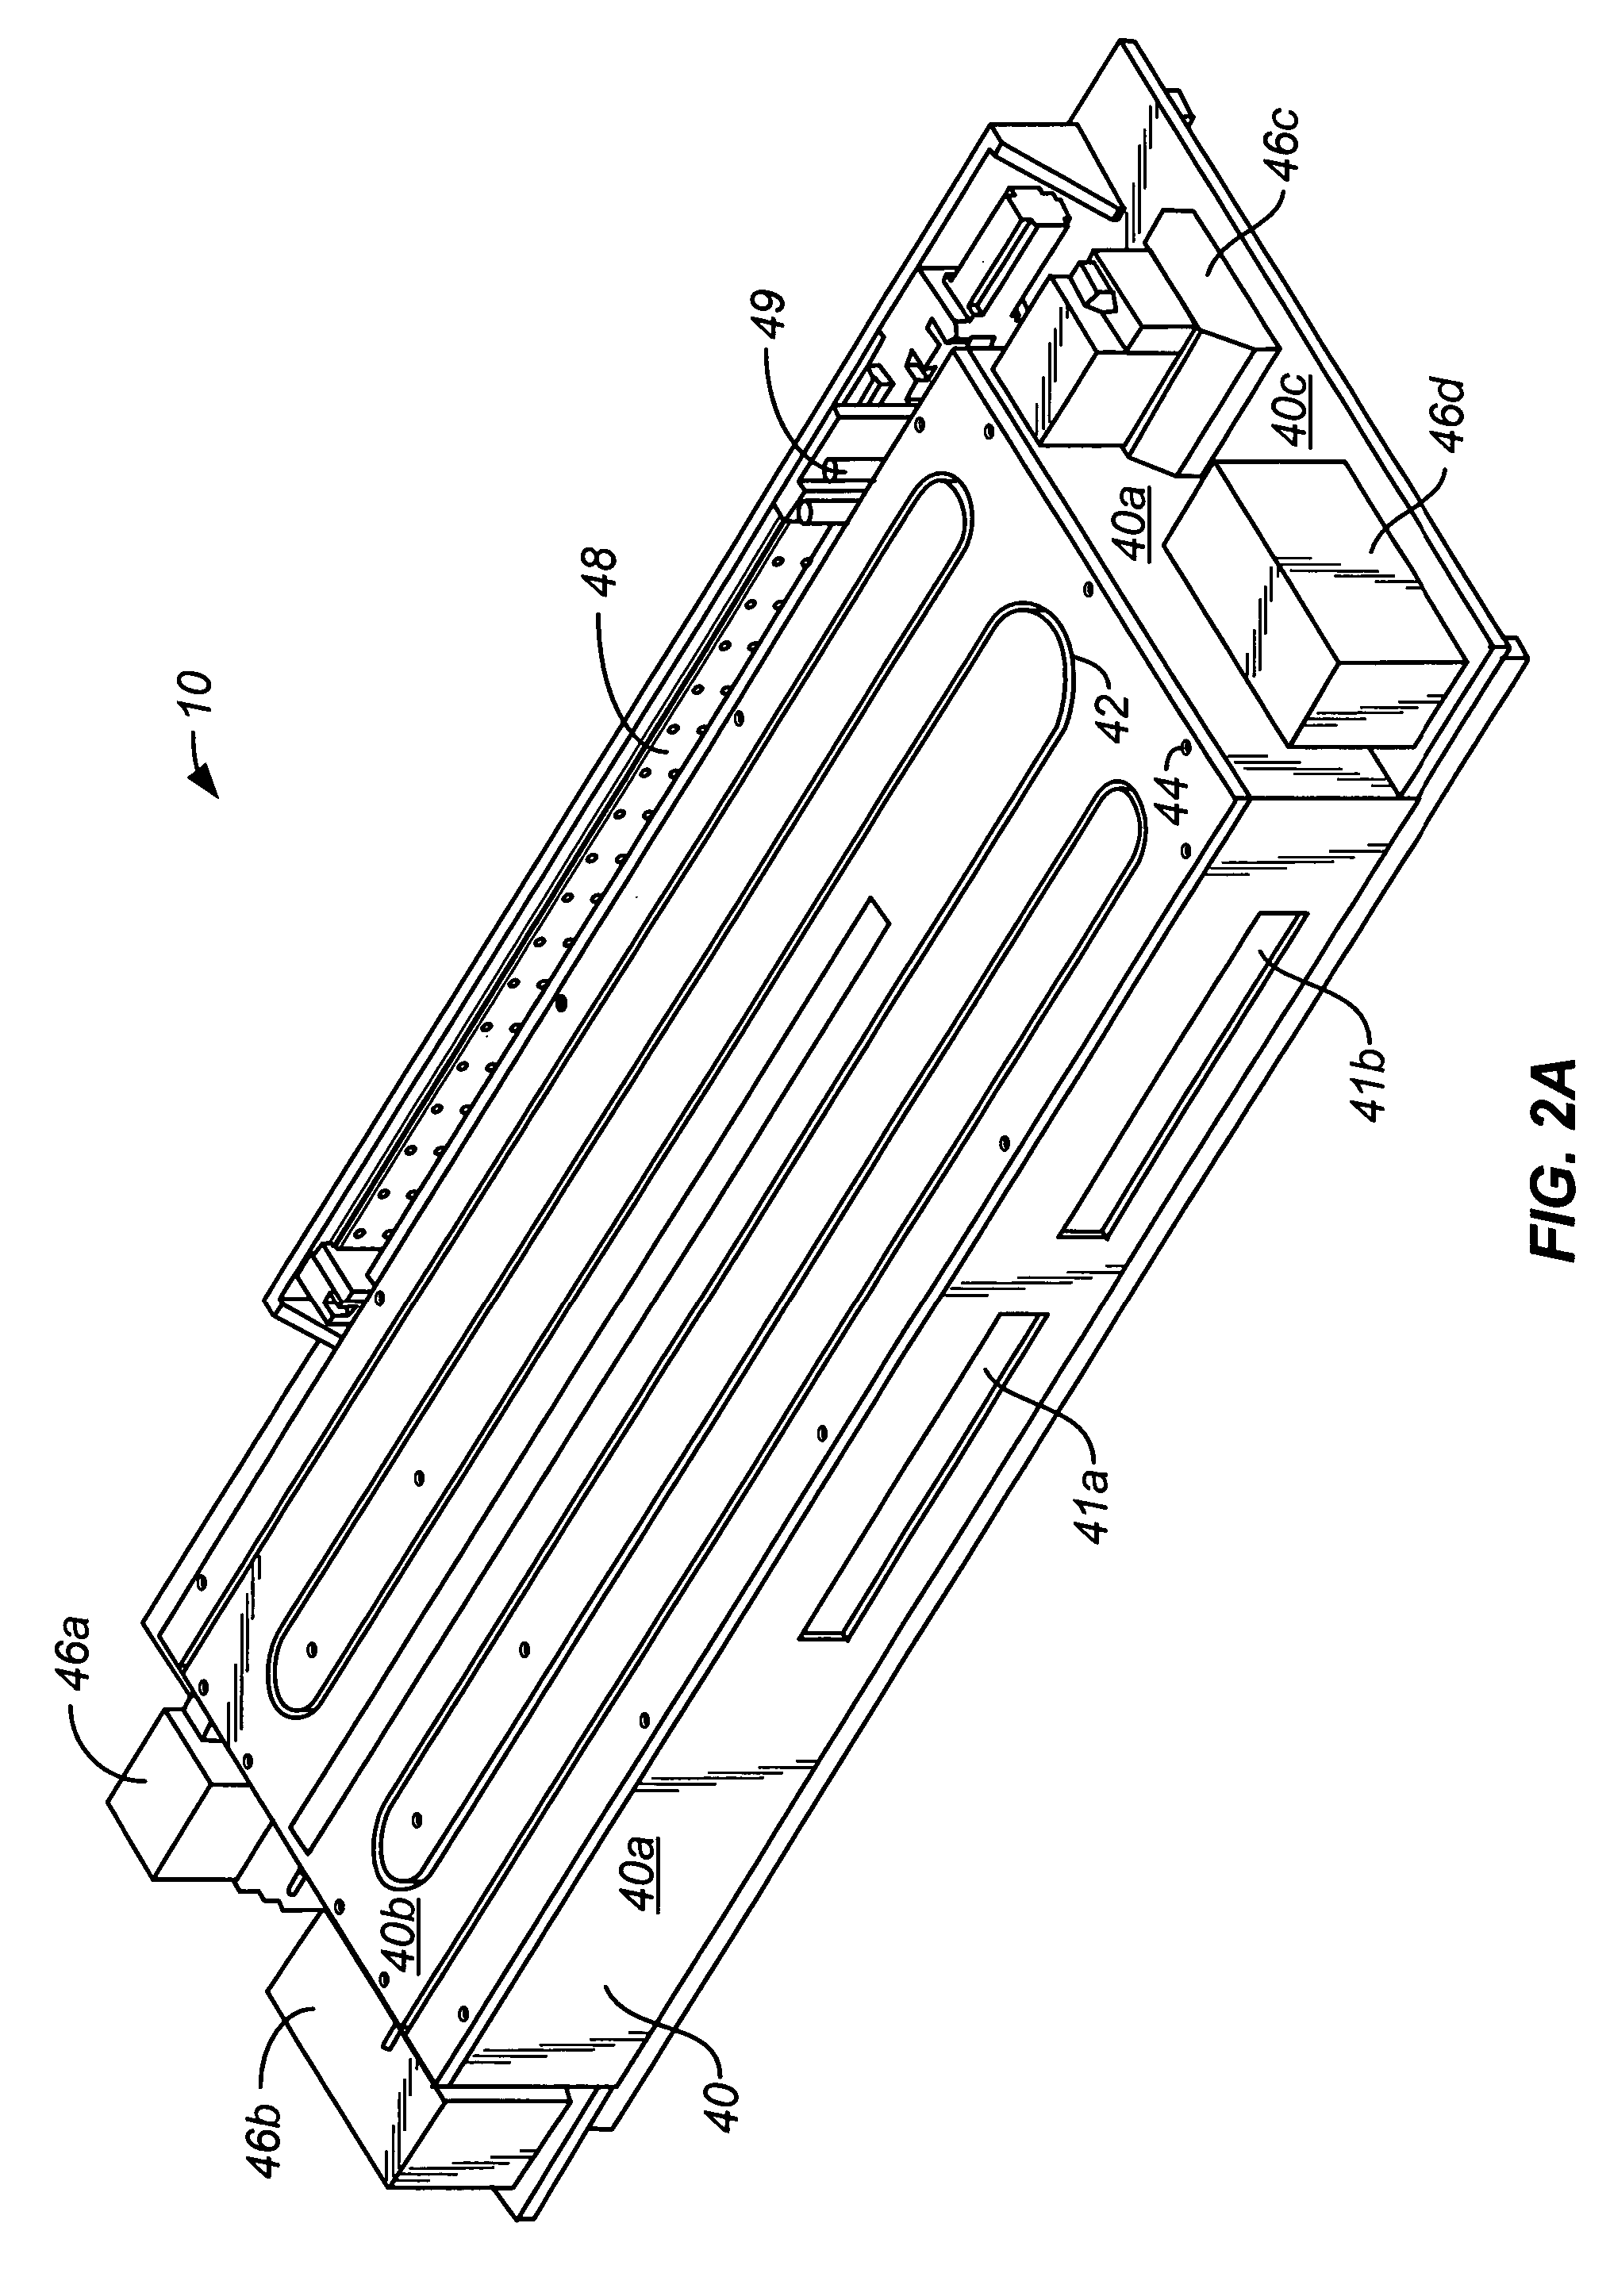 Integrated thermal unit having a shuttle with a temperature controlled surface